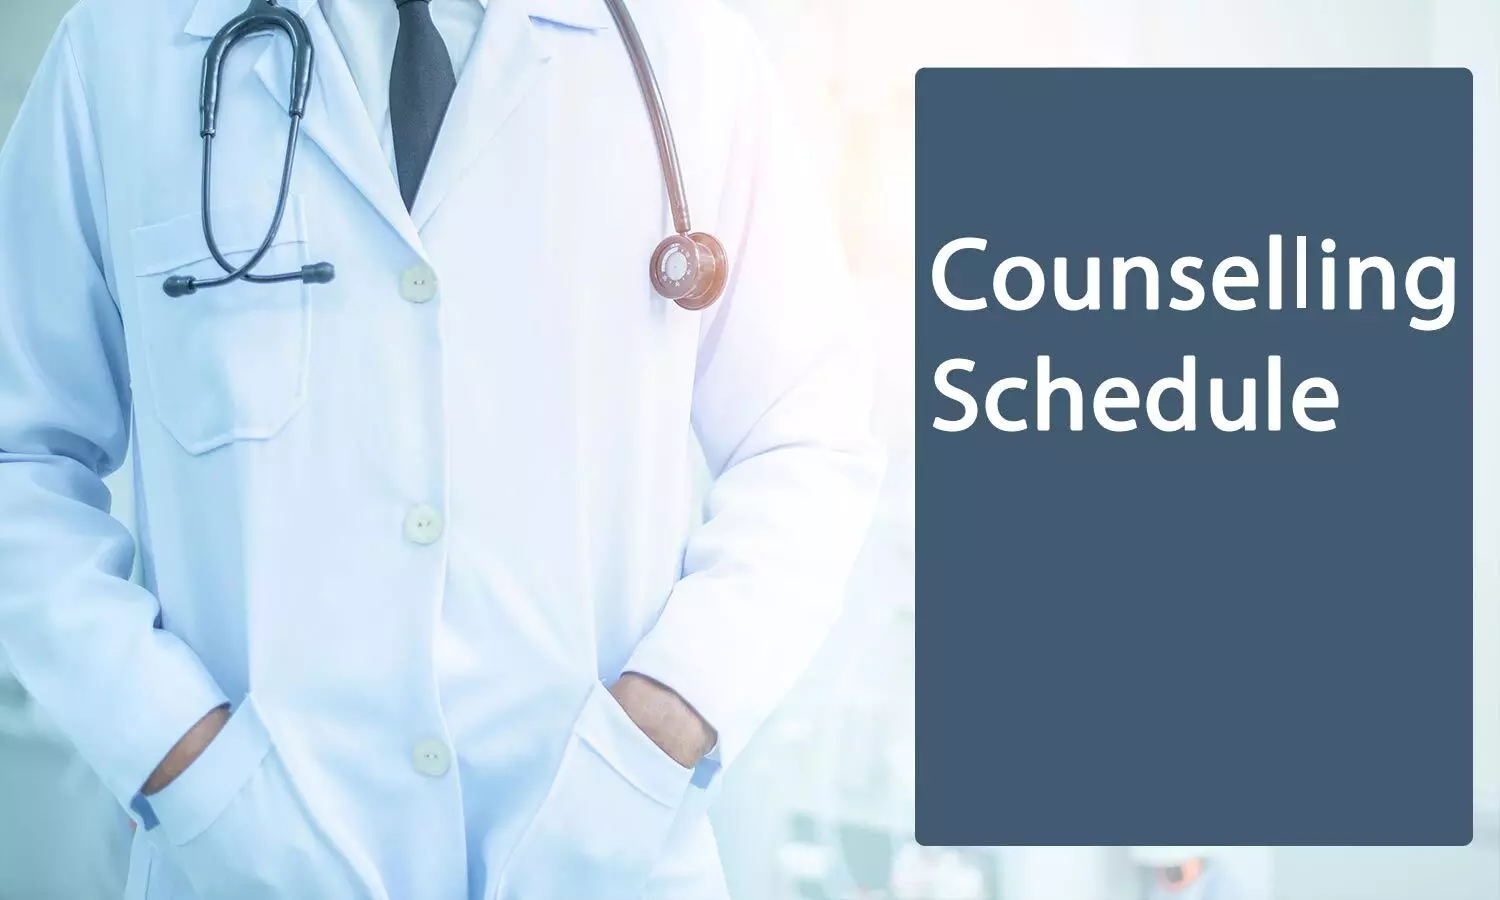 MCC Releases Revised NEET PG, MDS Counselling Schedule 2022